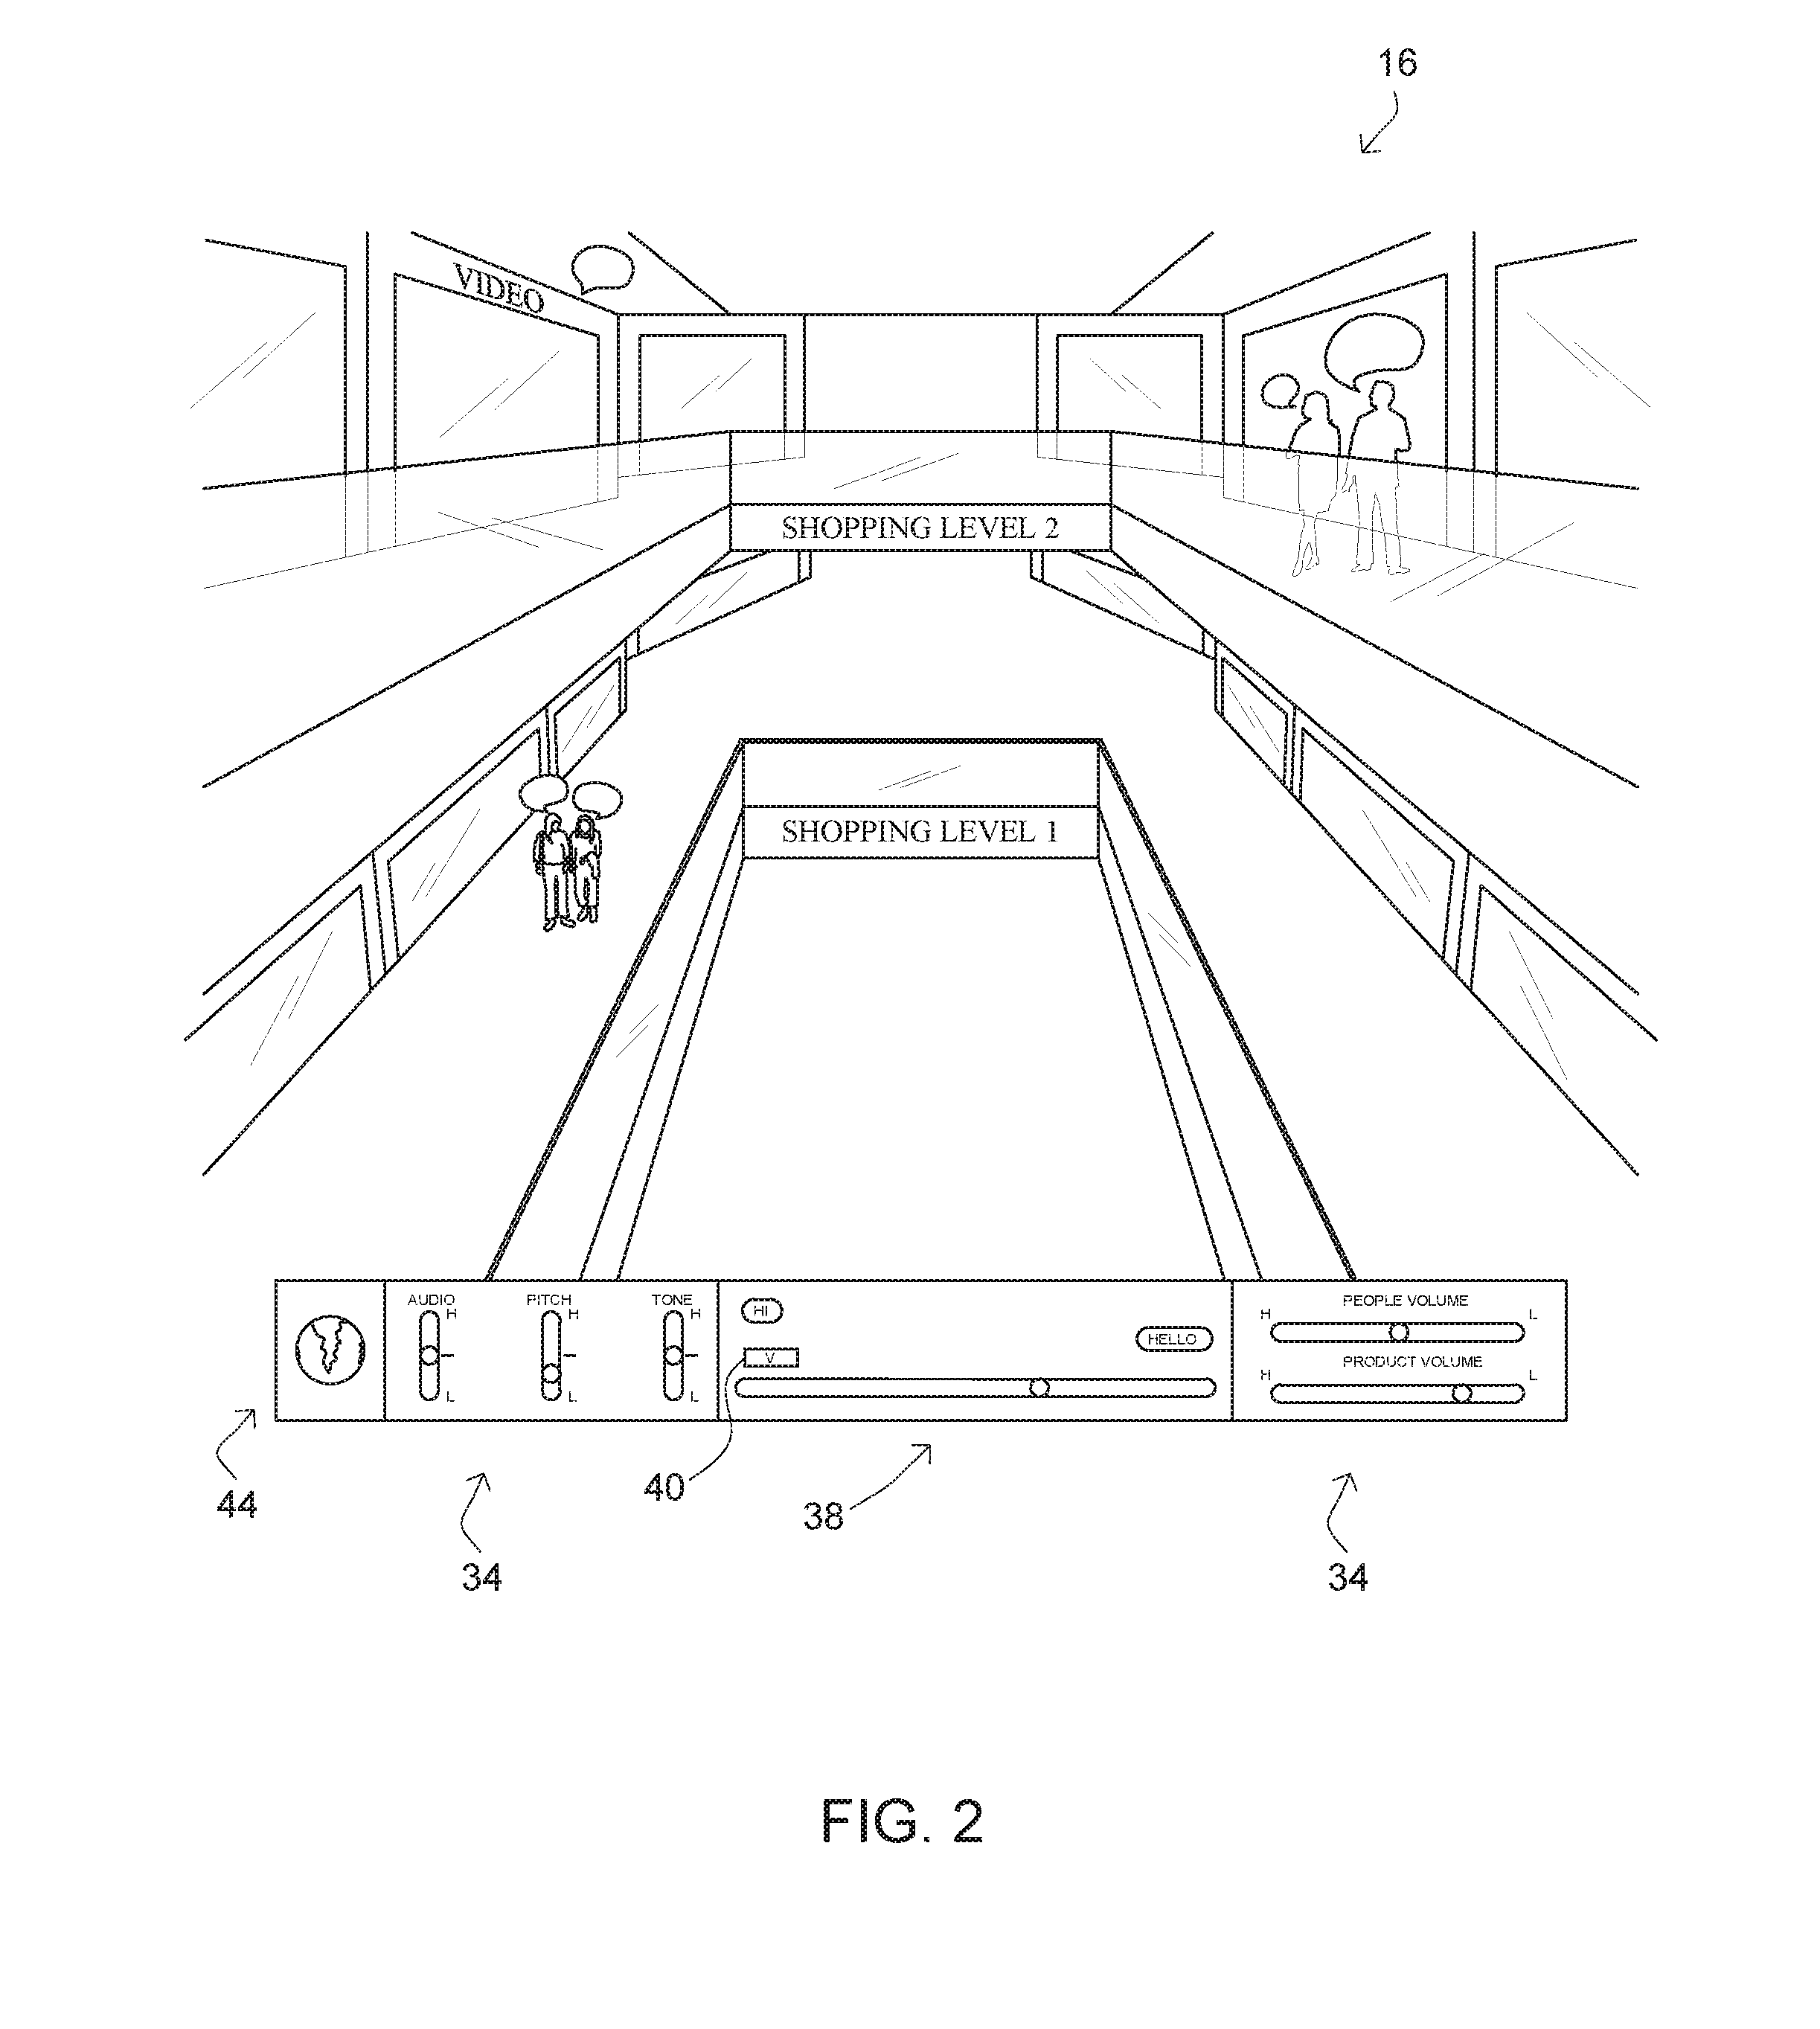 System and method of providing a virtual shopping experience